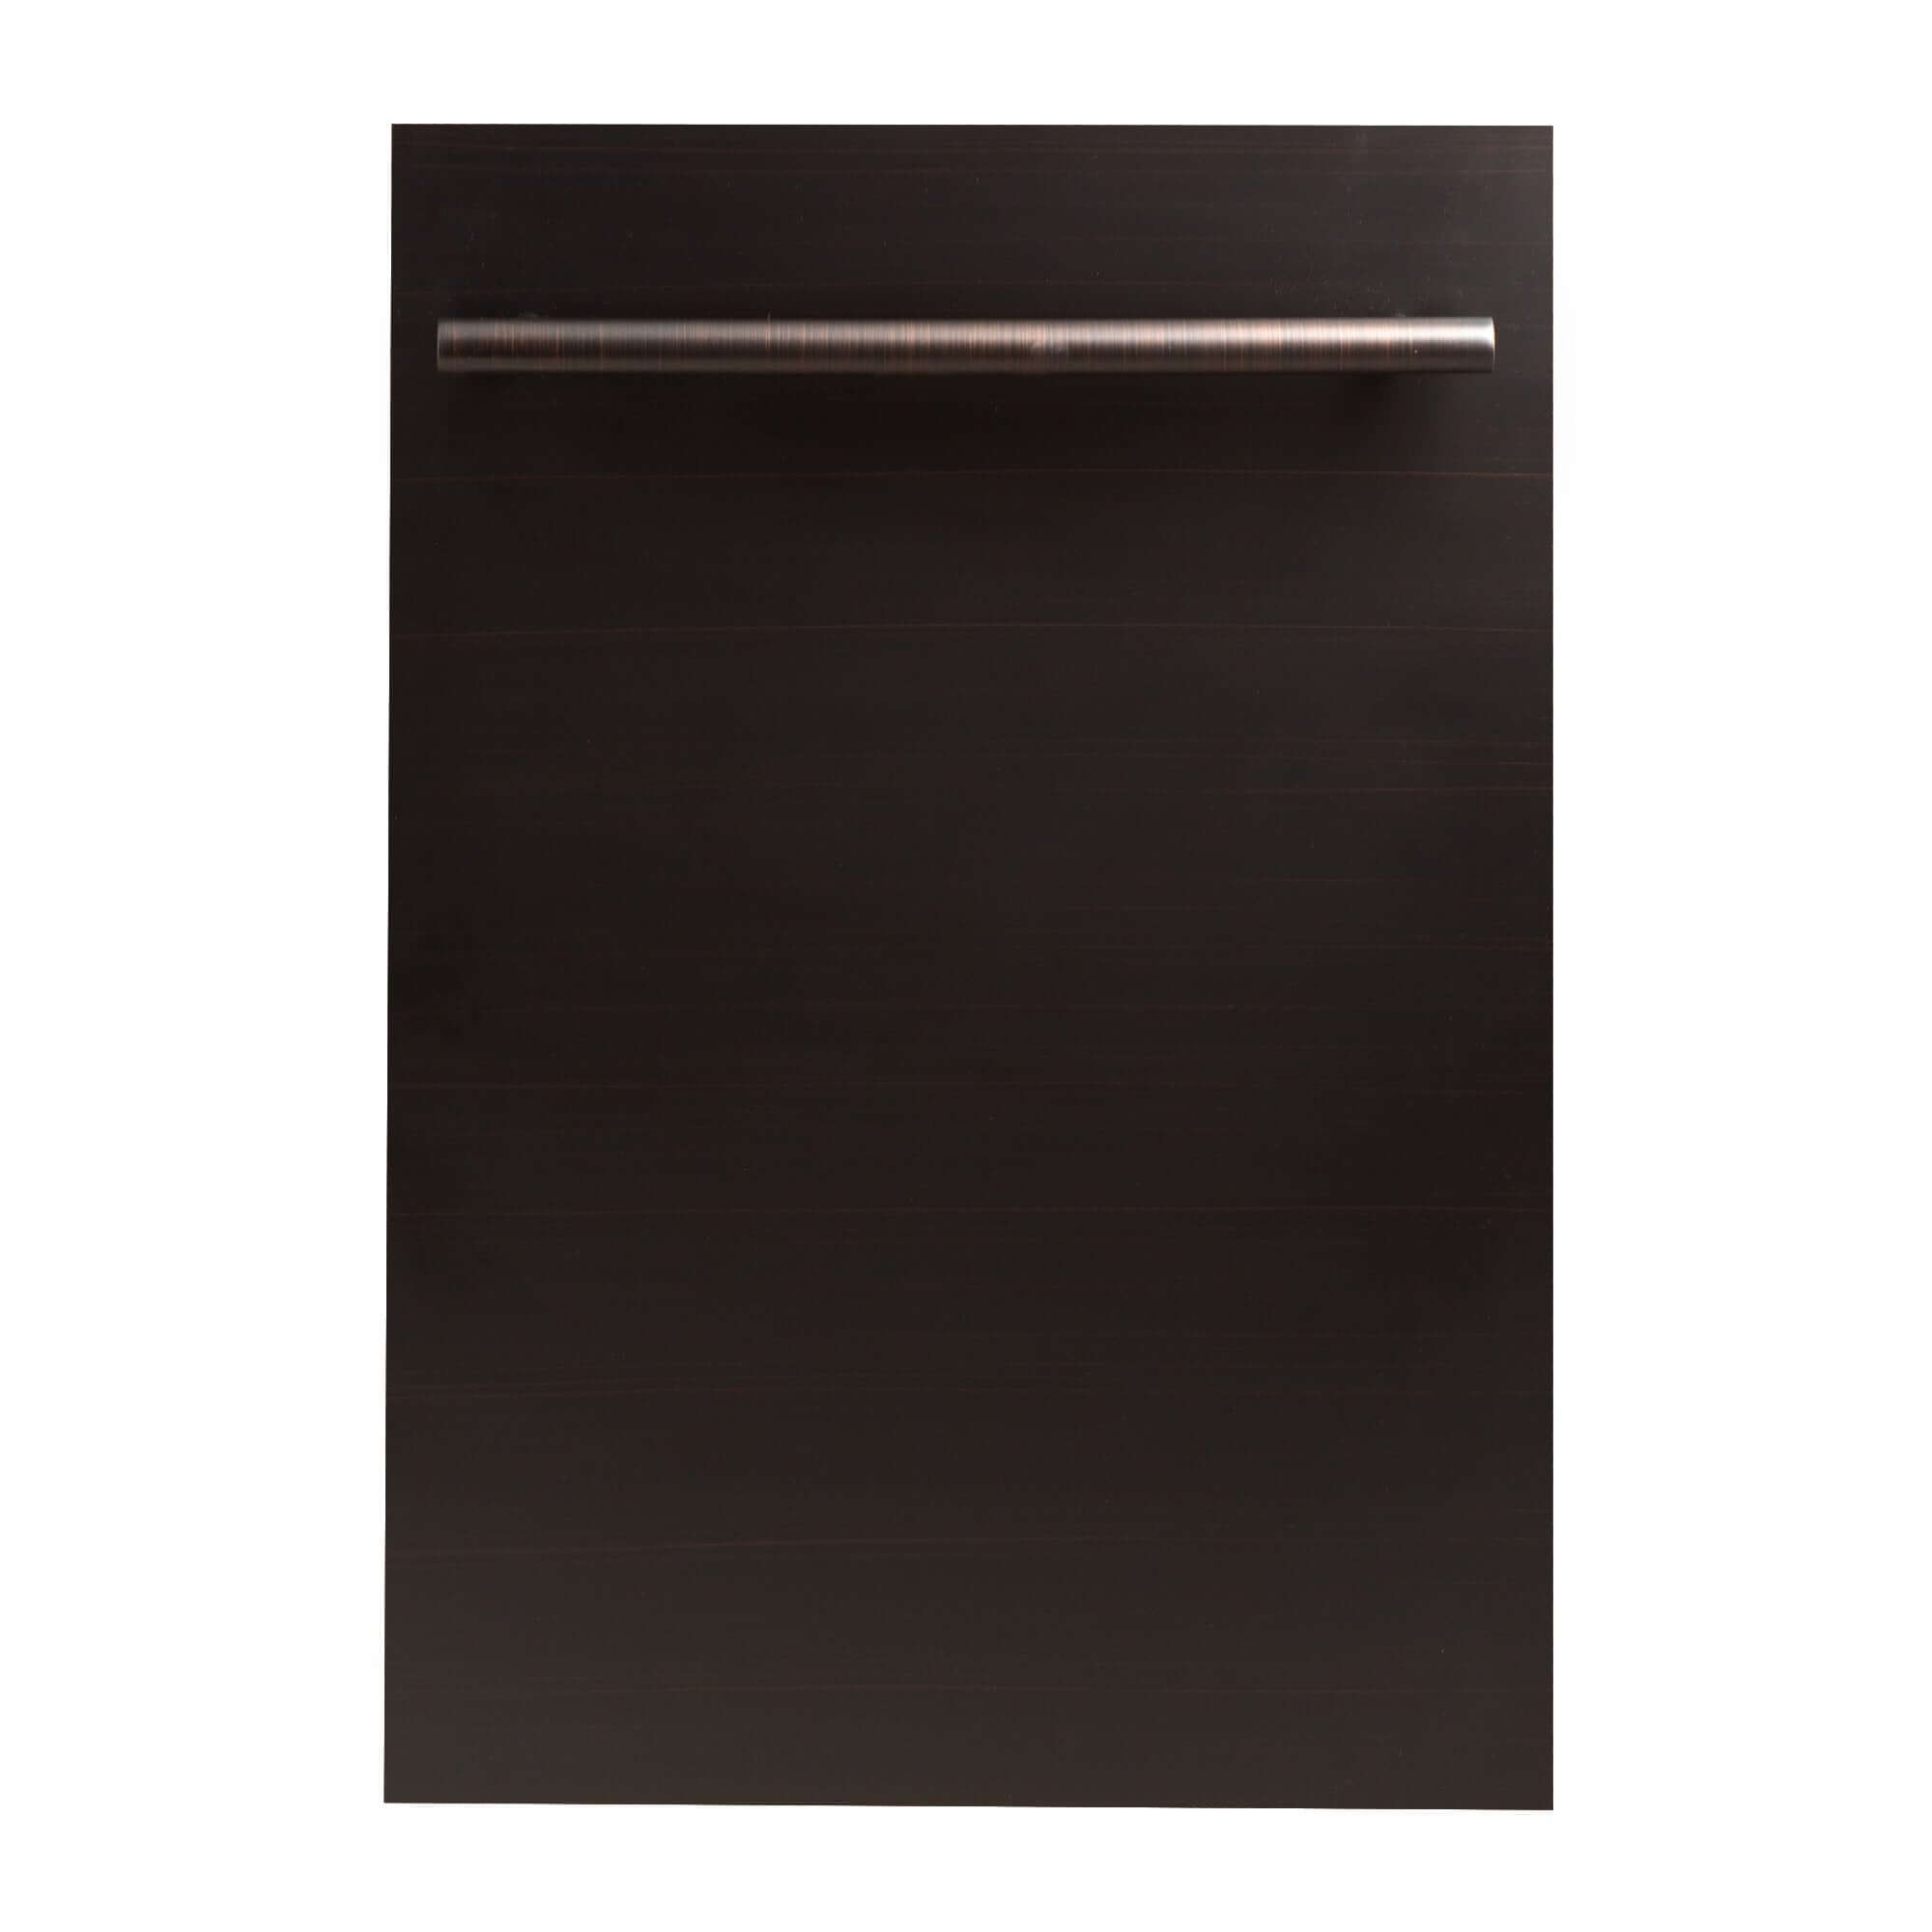 ZLINE 18 in. Dishwasher Panel with Modern Handle (DP-18) Black Stainless Steel